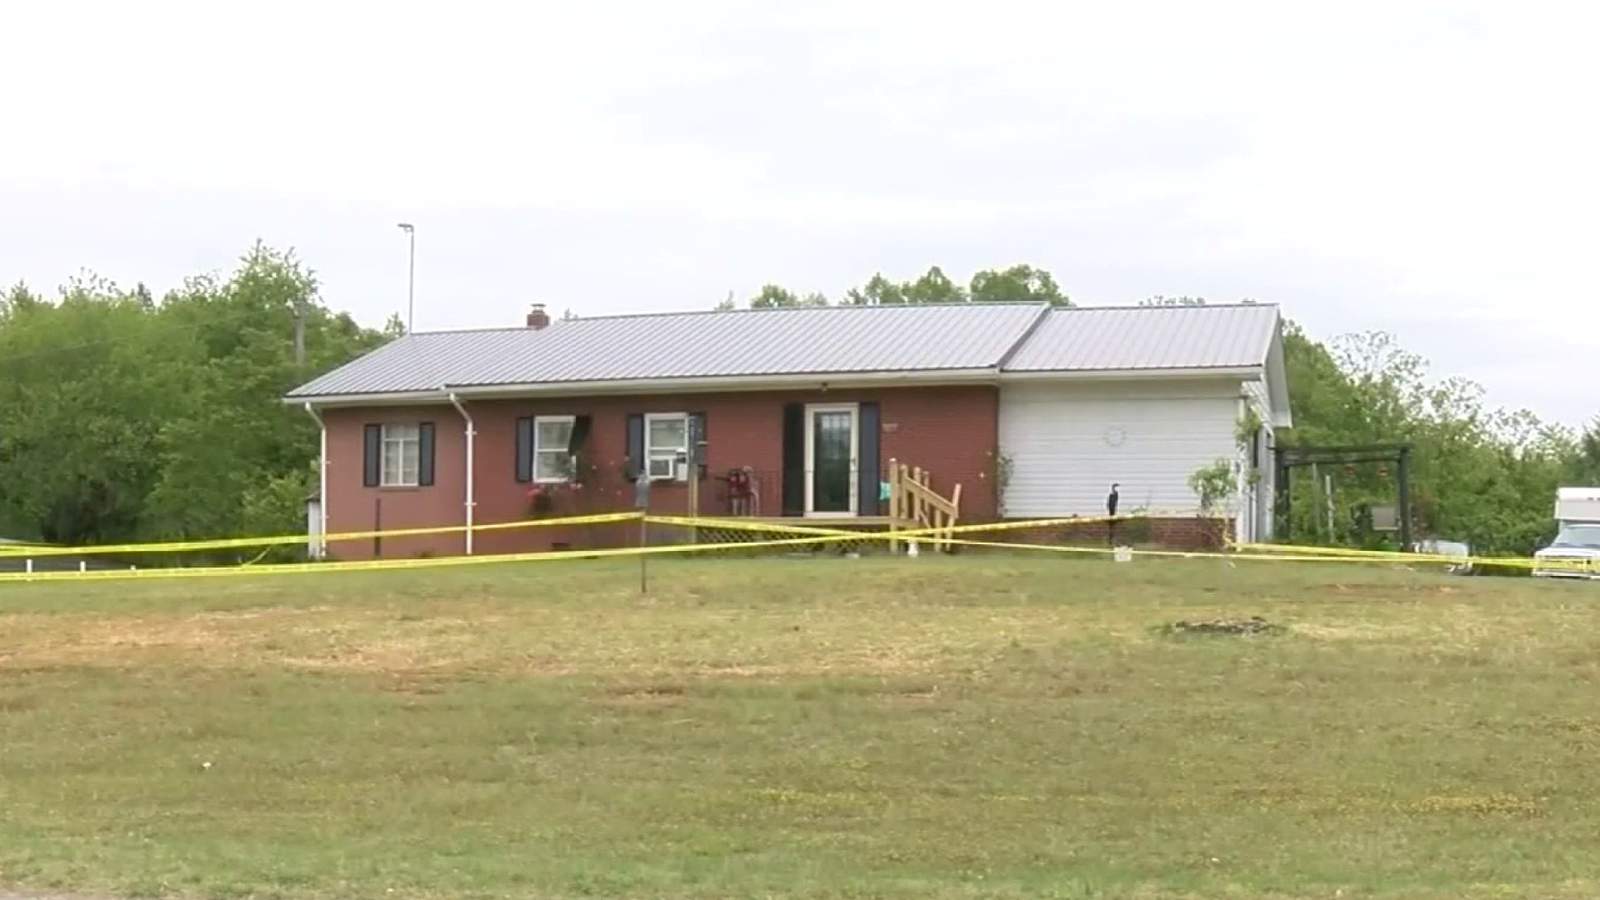 Husband, three others, charged with first-degree murder of Henry County woman